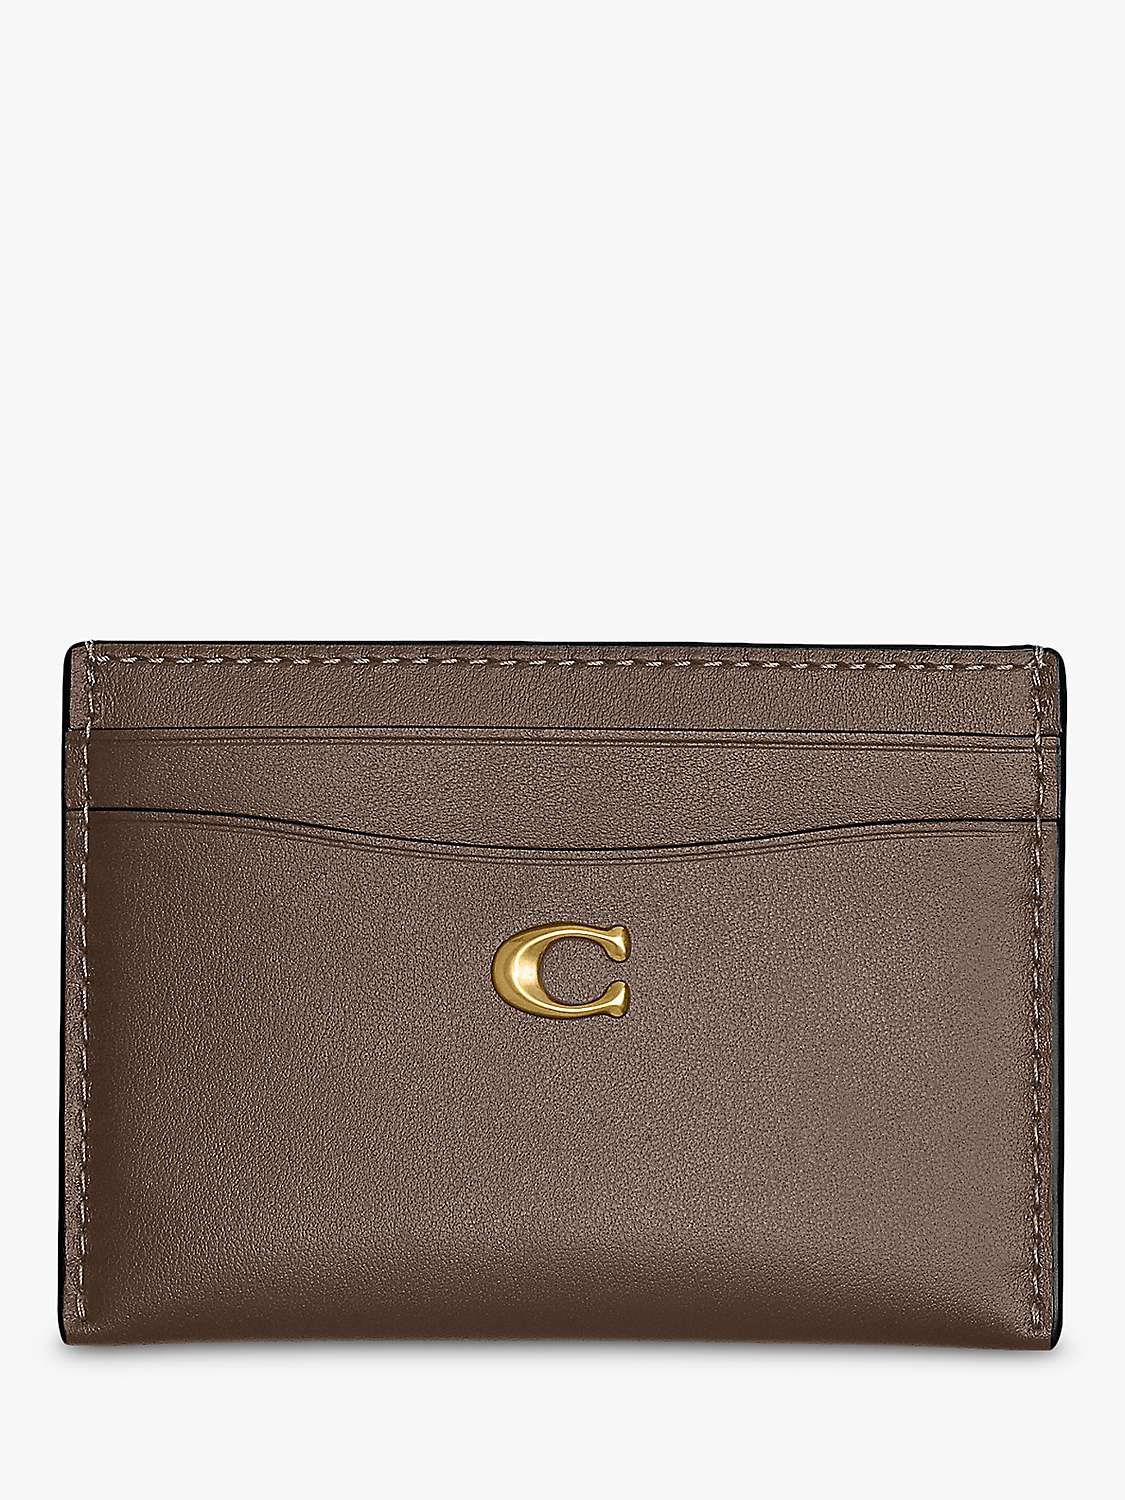 Buy Coach Leather Card Case, Dark Stone Online at johnlewis.com